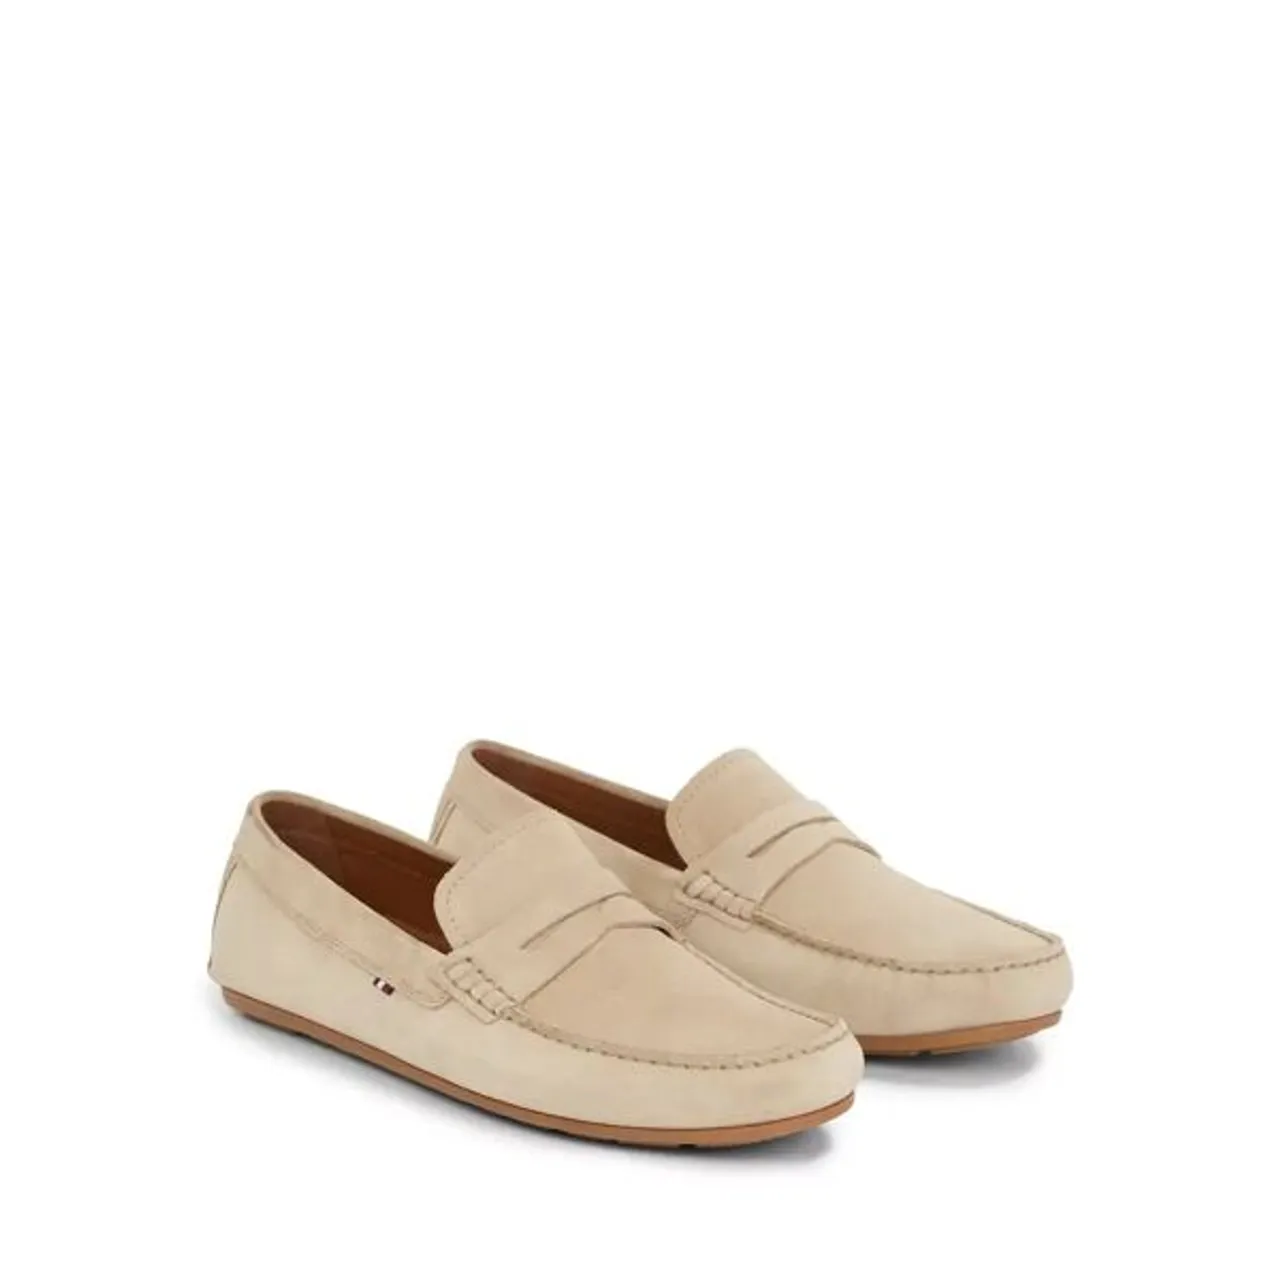 Tommy Hilfiger Suede Loafers - Beige - Male